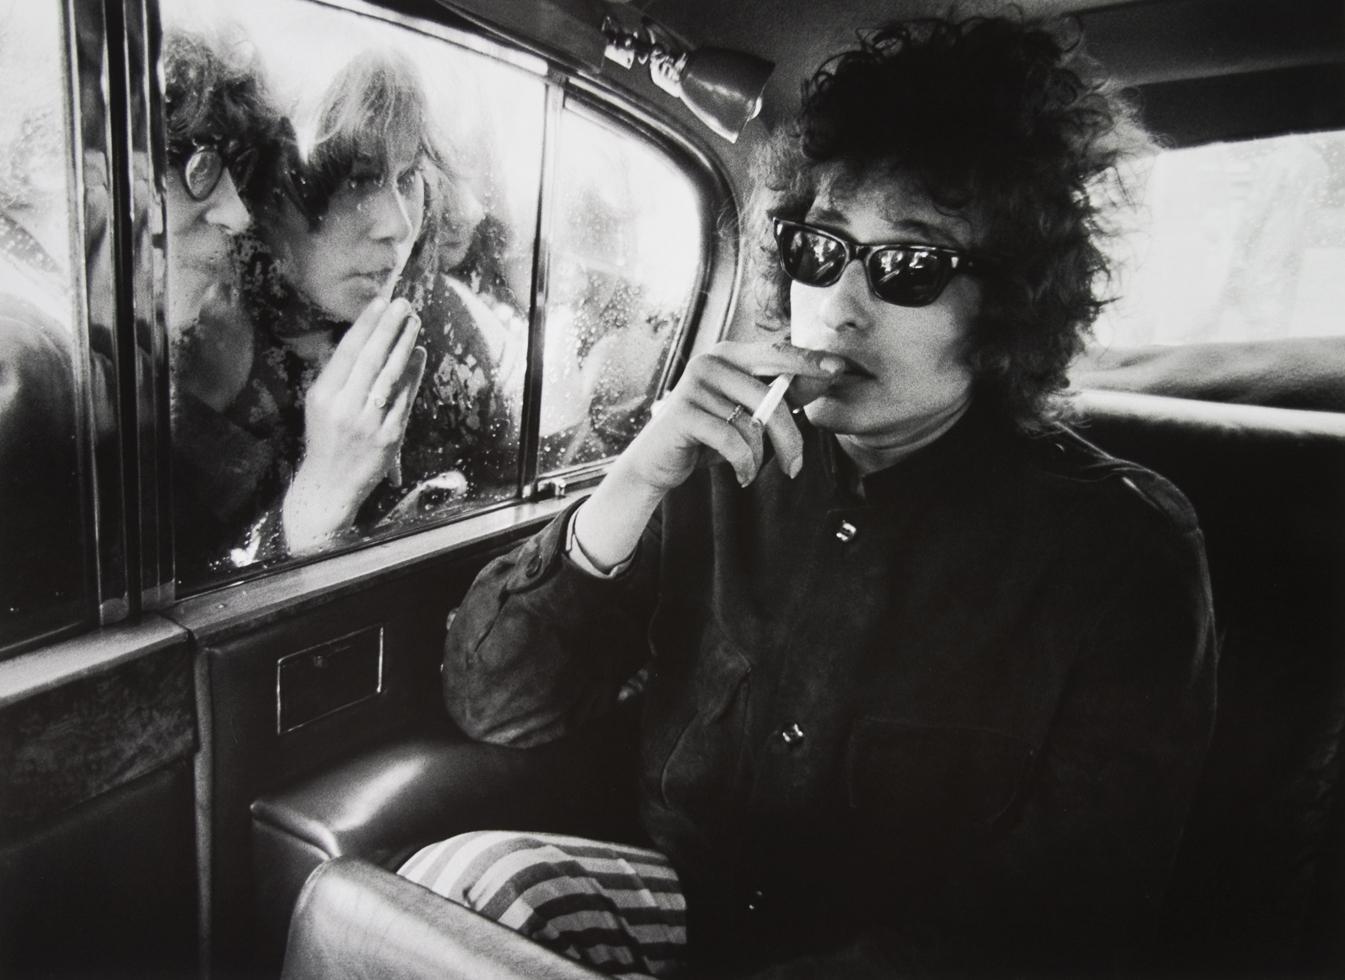 Barry Feinstein Black and White Photograph - Bob Dylan "Fans"